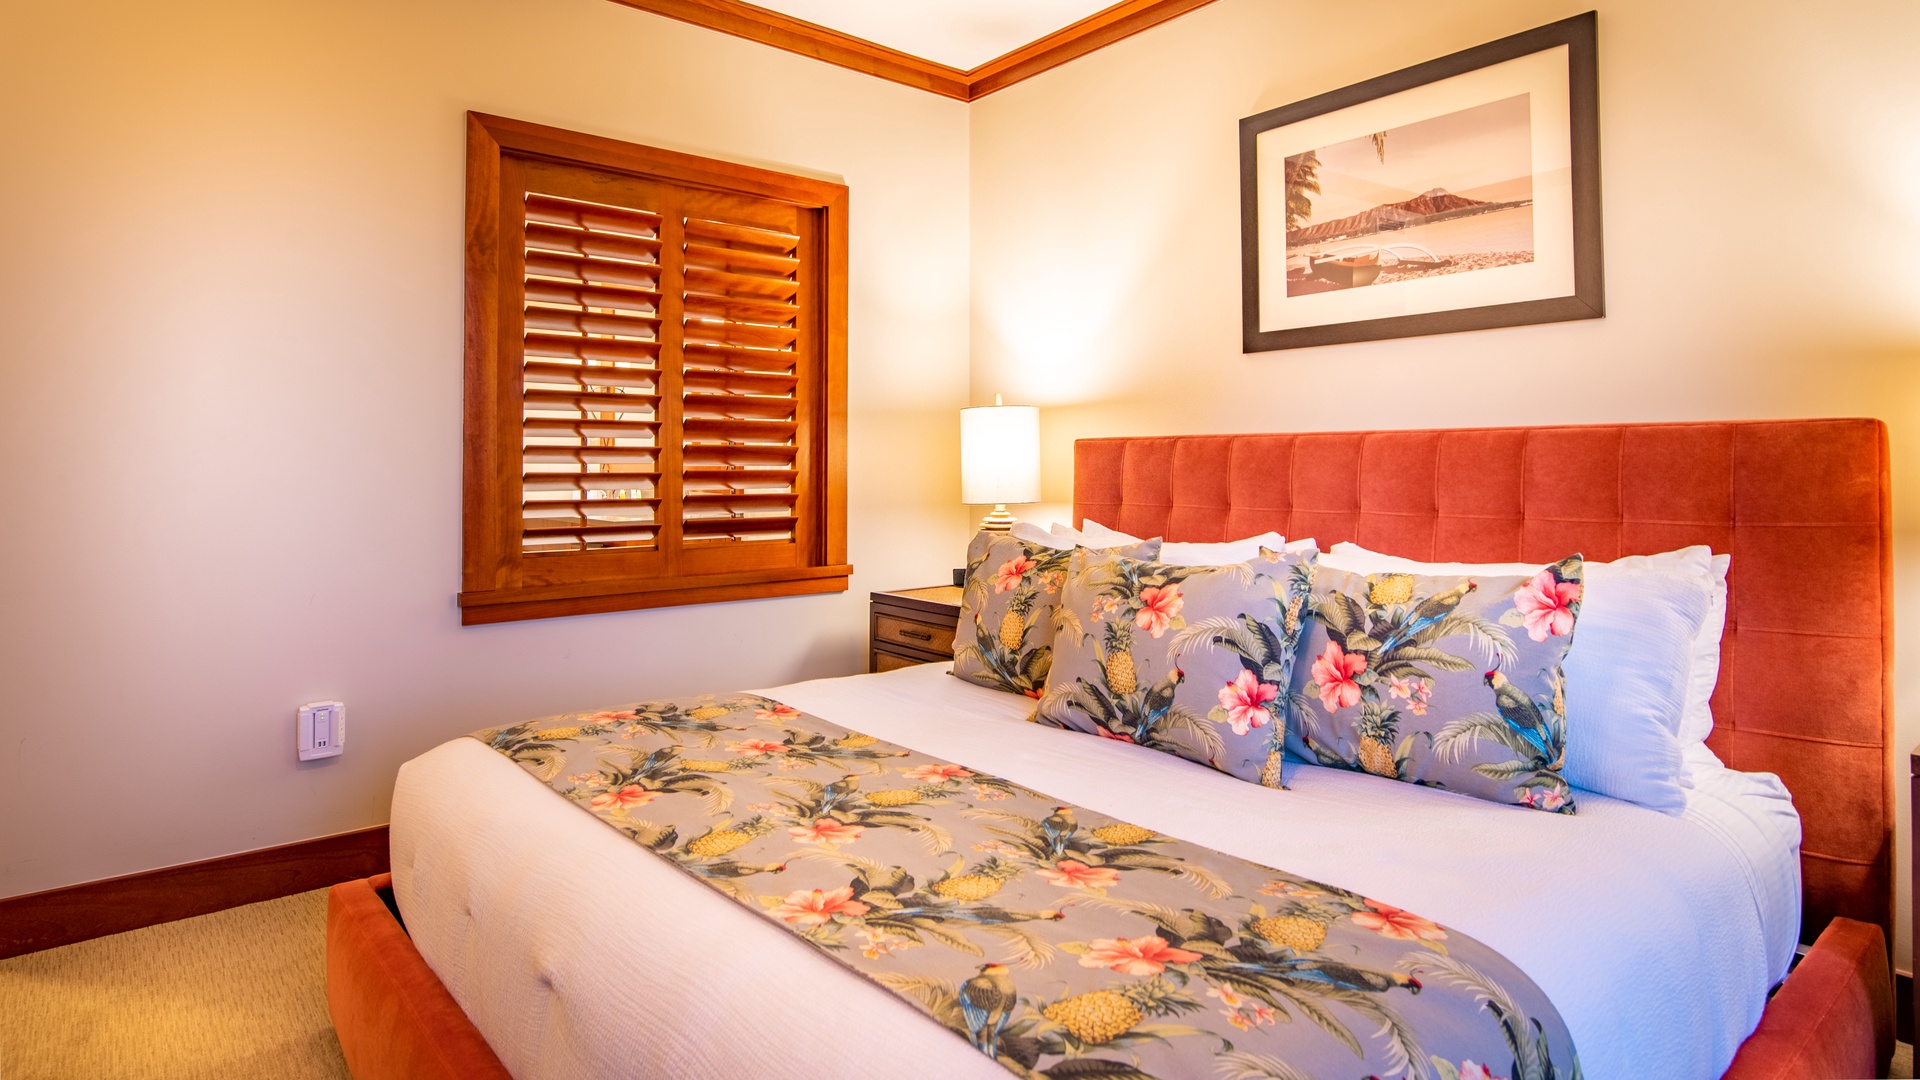 Kapolei Vacation Rentals, Ko Olina Beach Villas B301 - The primary guest bedroom with luxurious linens and bright patterns.